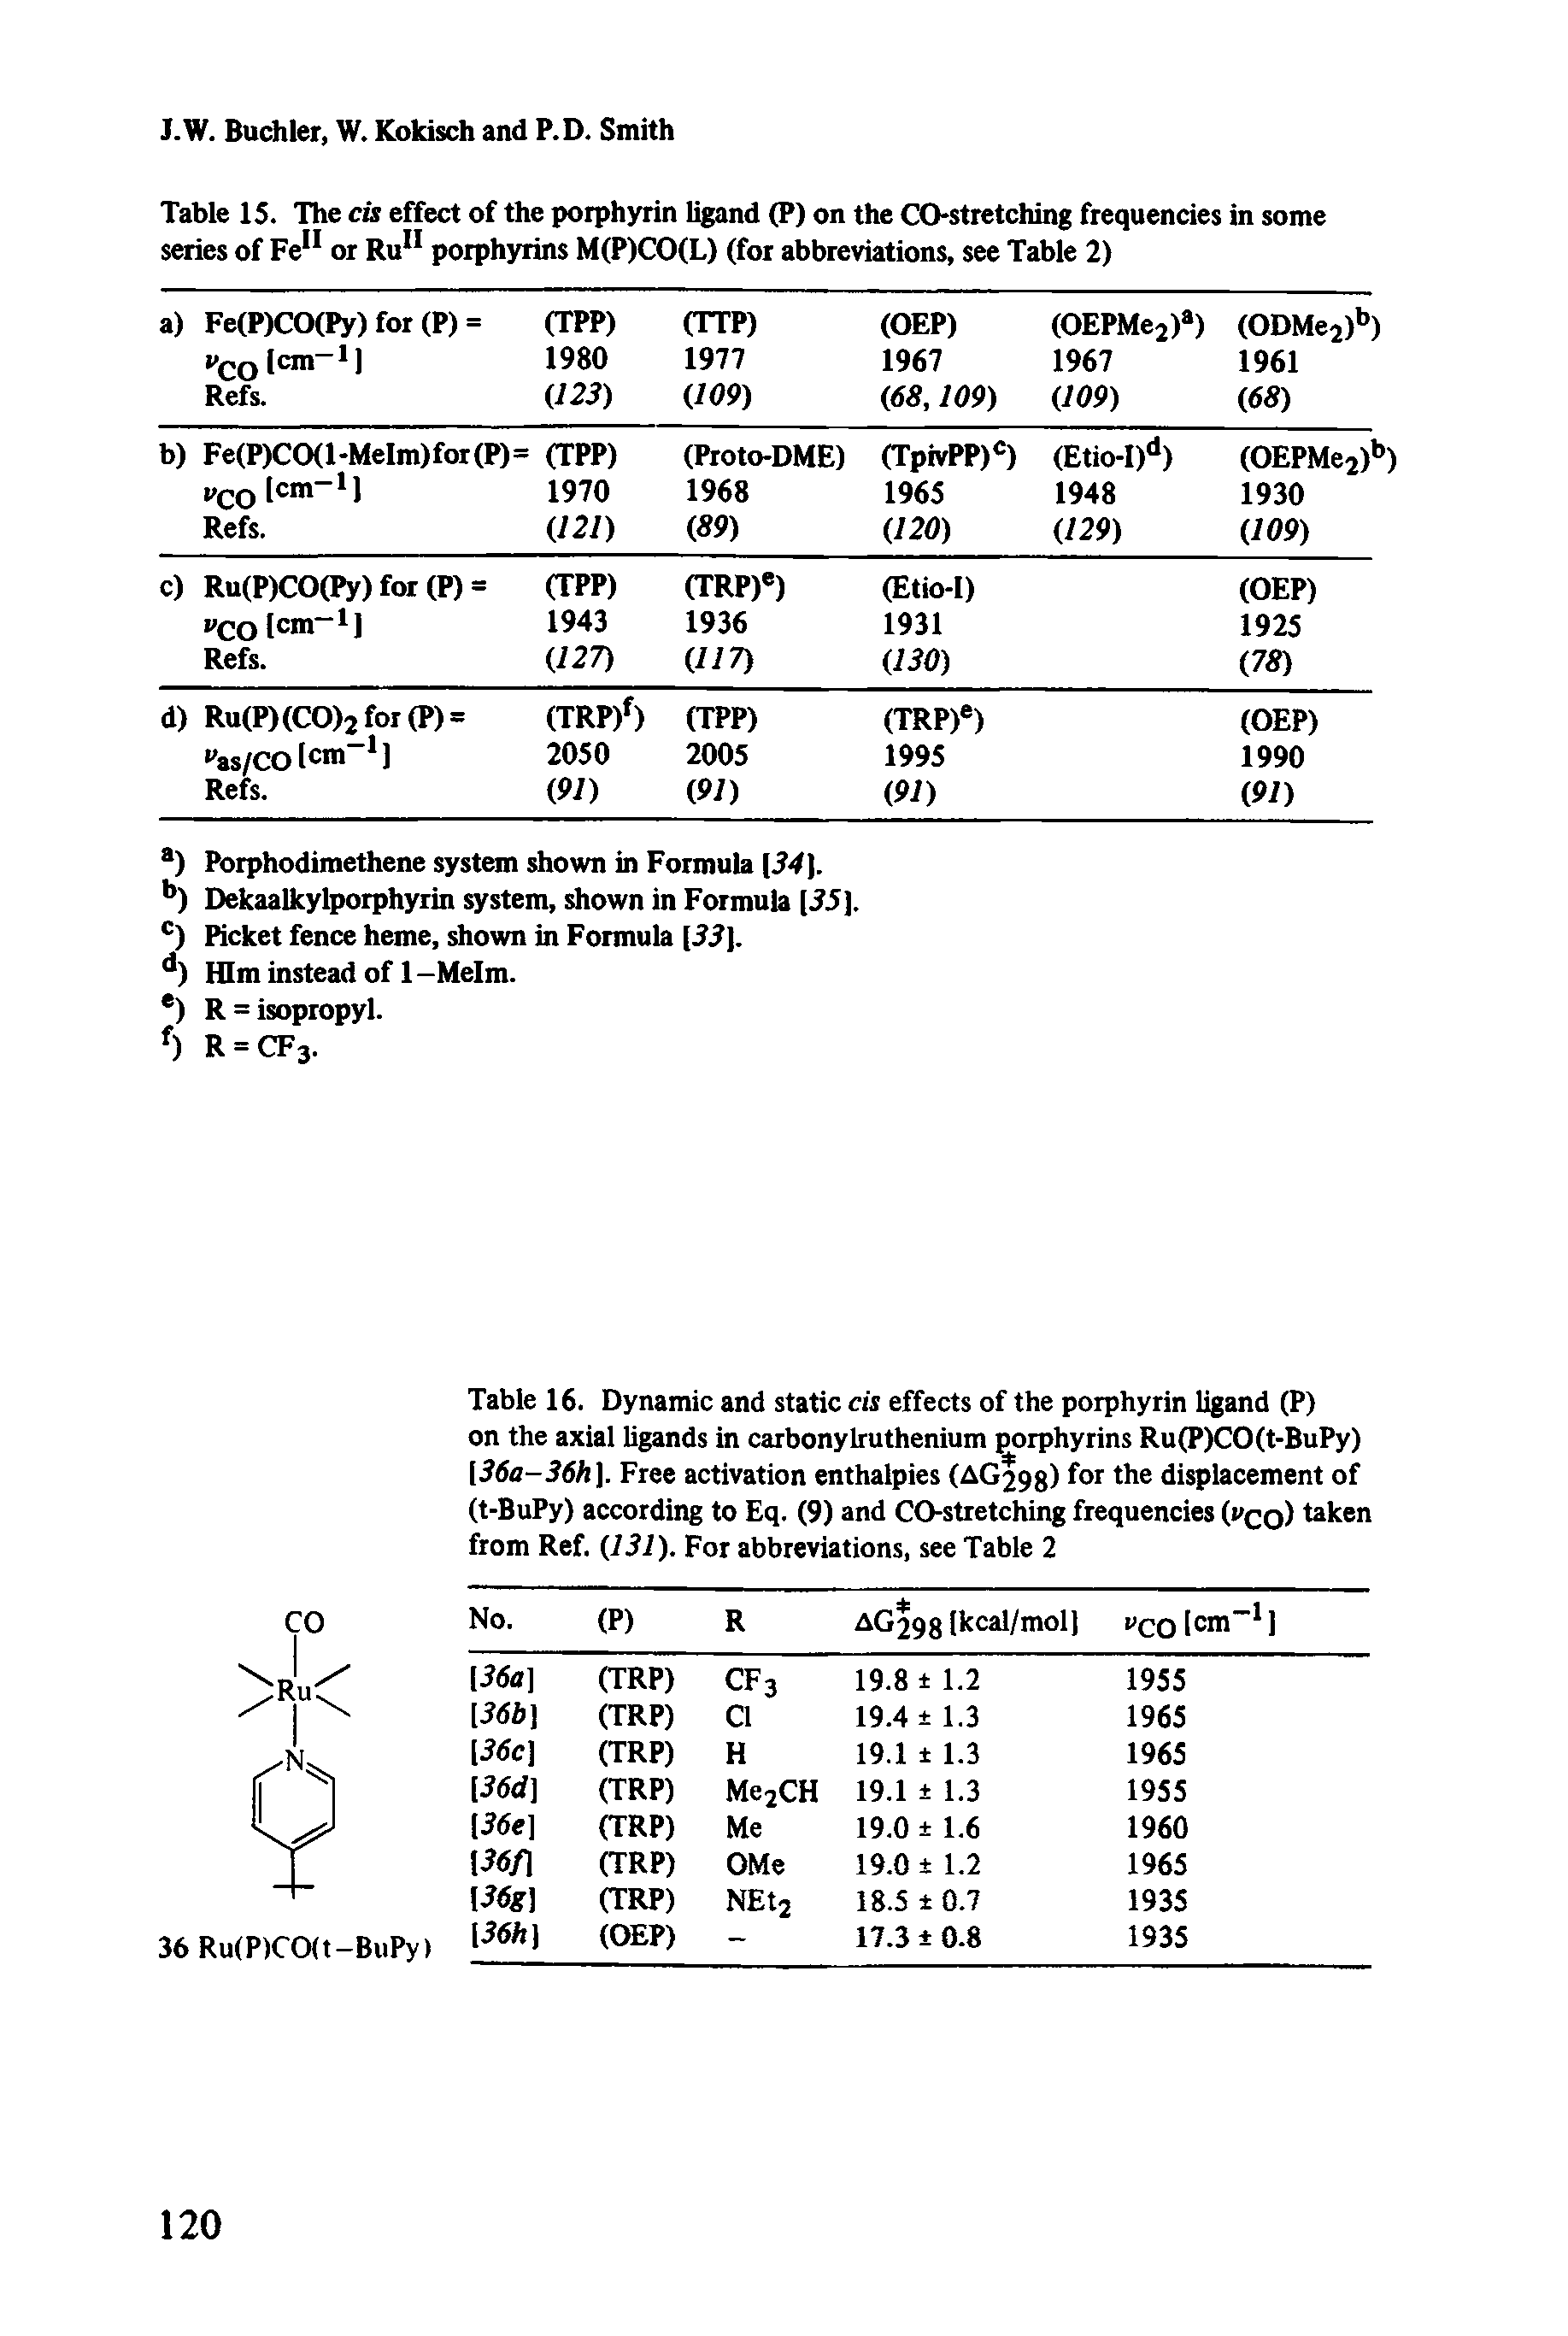 Table 16. Dynamic and static cis effects of the porphyrin ligand (P) on the axial ligands in carbonylruthenium porphyrins Ru(P)CO(t-BuPy) [36a-36h. Free activation enthalpies (AG298) for the displacement of (t-BuPy) according to Eq. (9) and CO-stretching frequencies (v< o) taken from Ref. (131). For abbreviations, see Table 2...